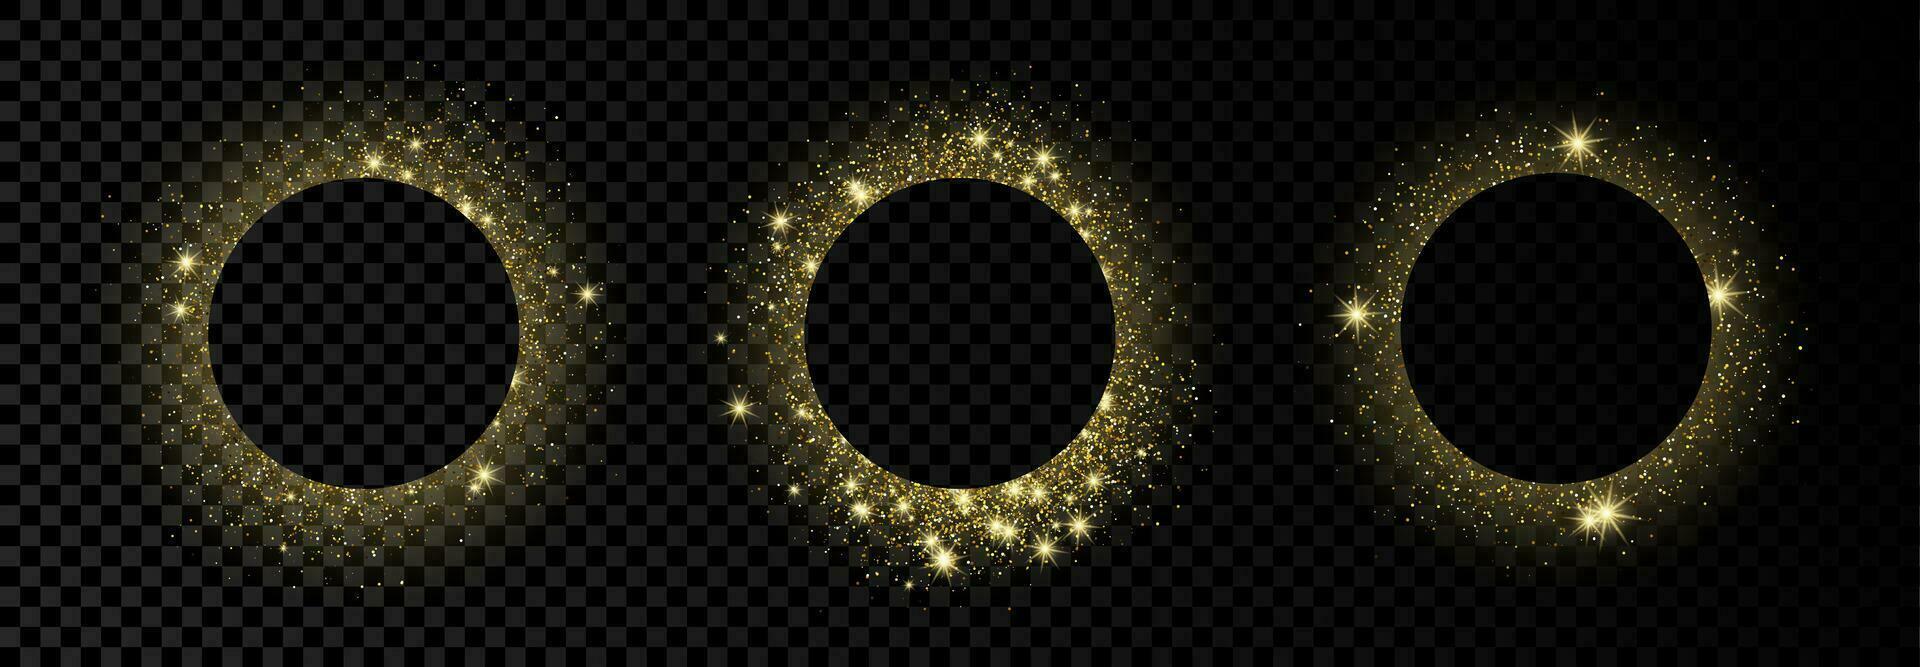 Set of three golden circle frames with glitter, sparkles and flares on dark background. Empty luxury backdrop. Vector illustration.